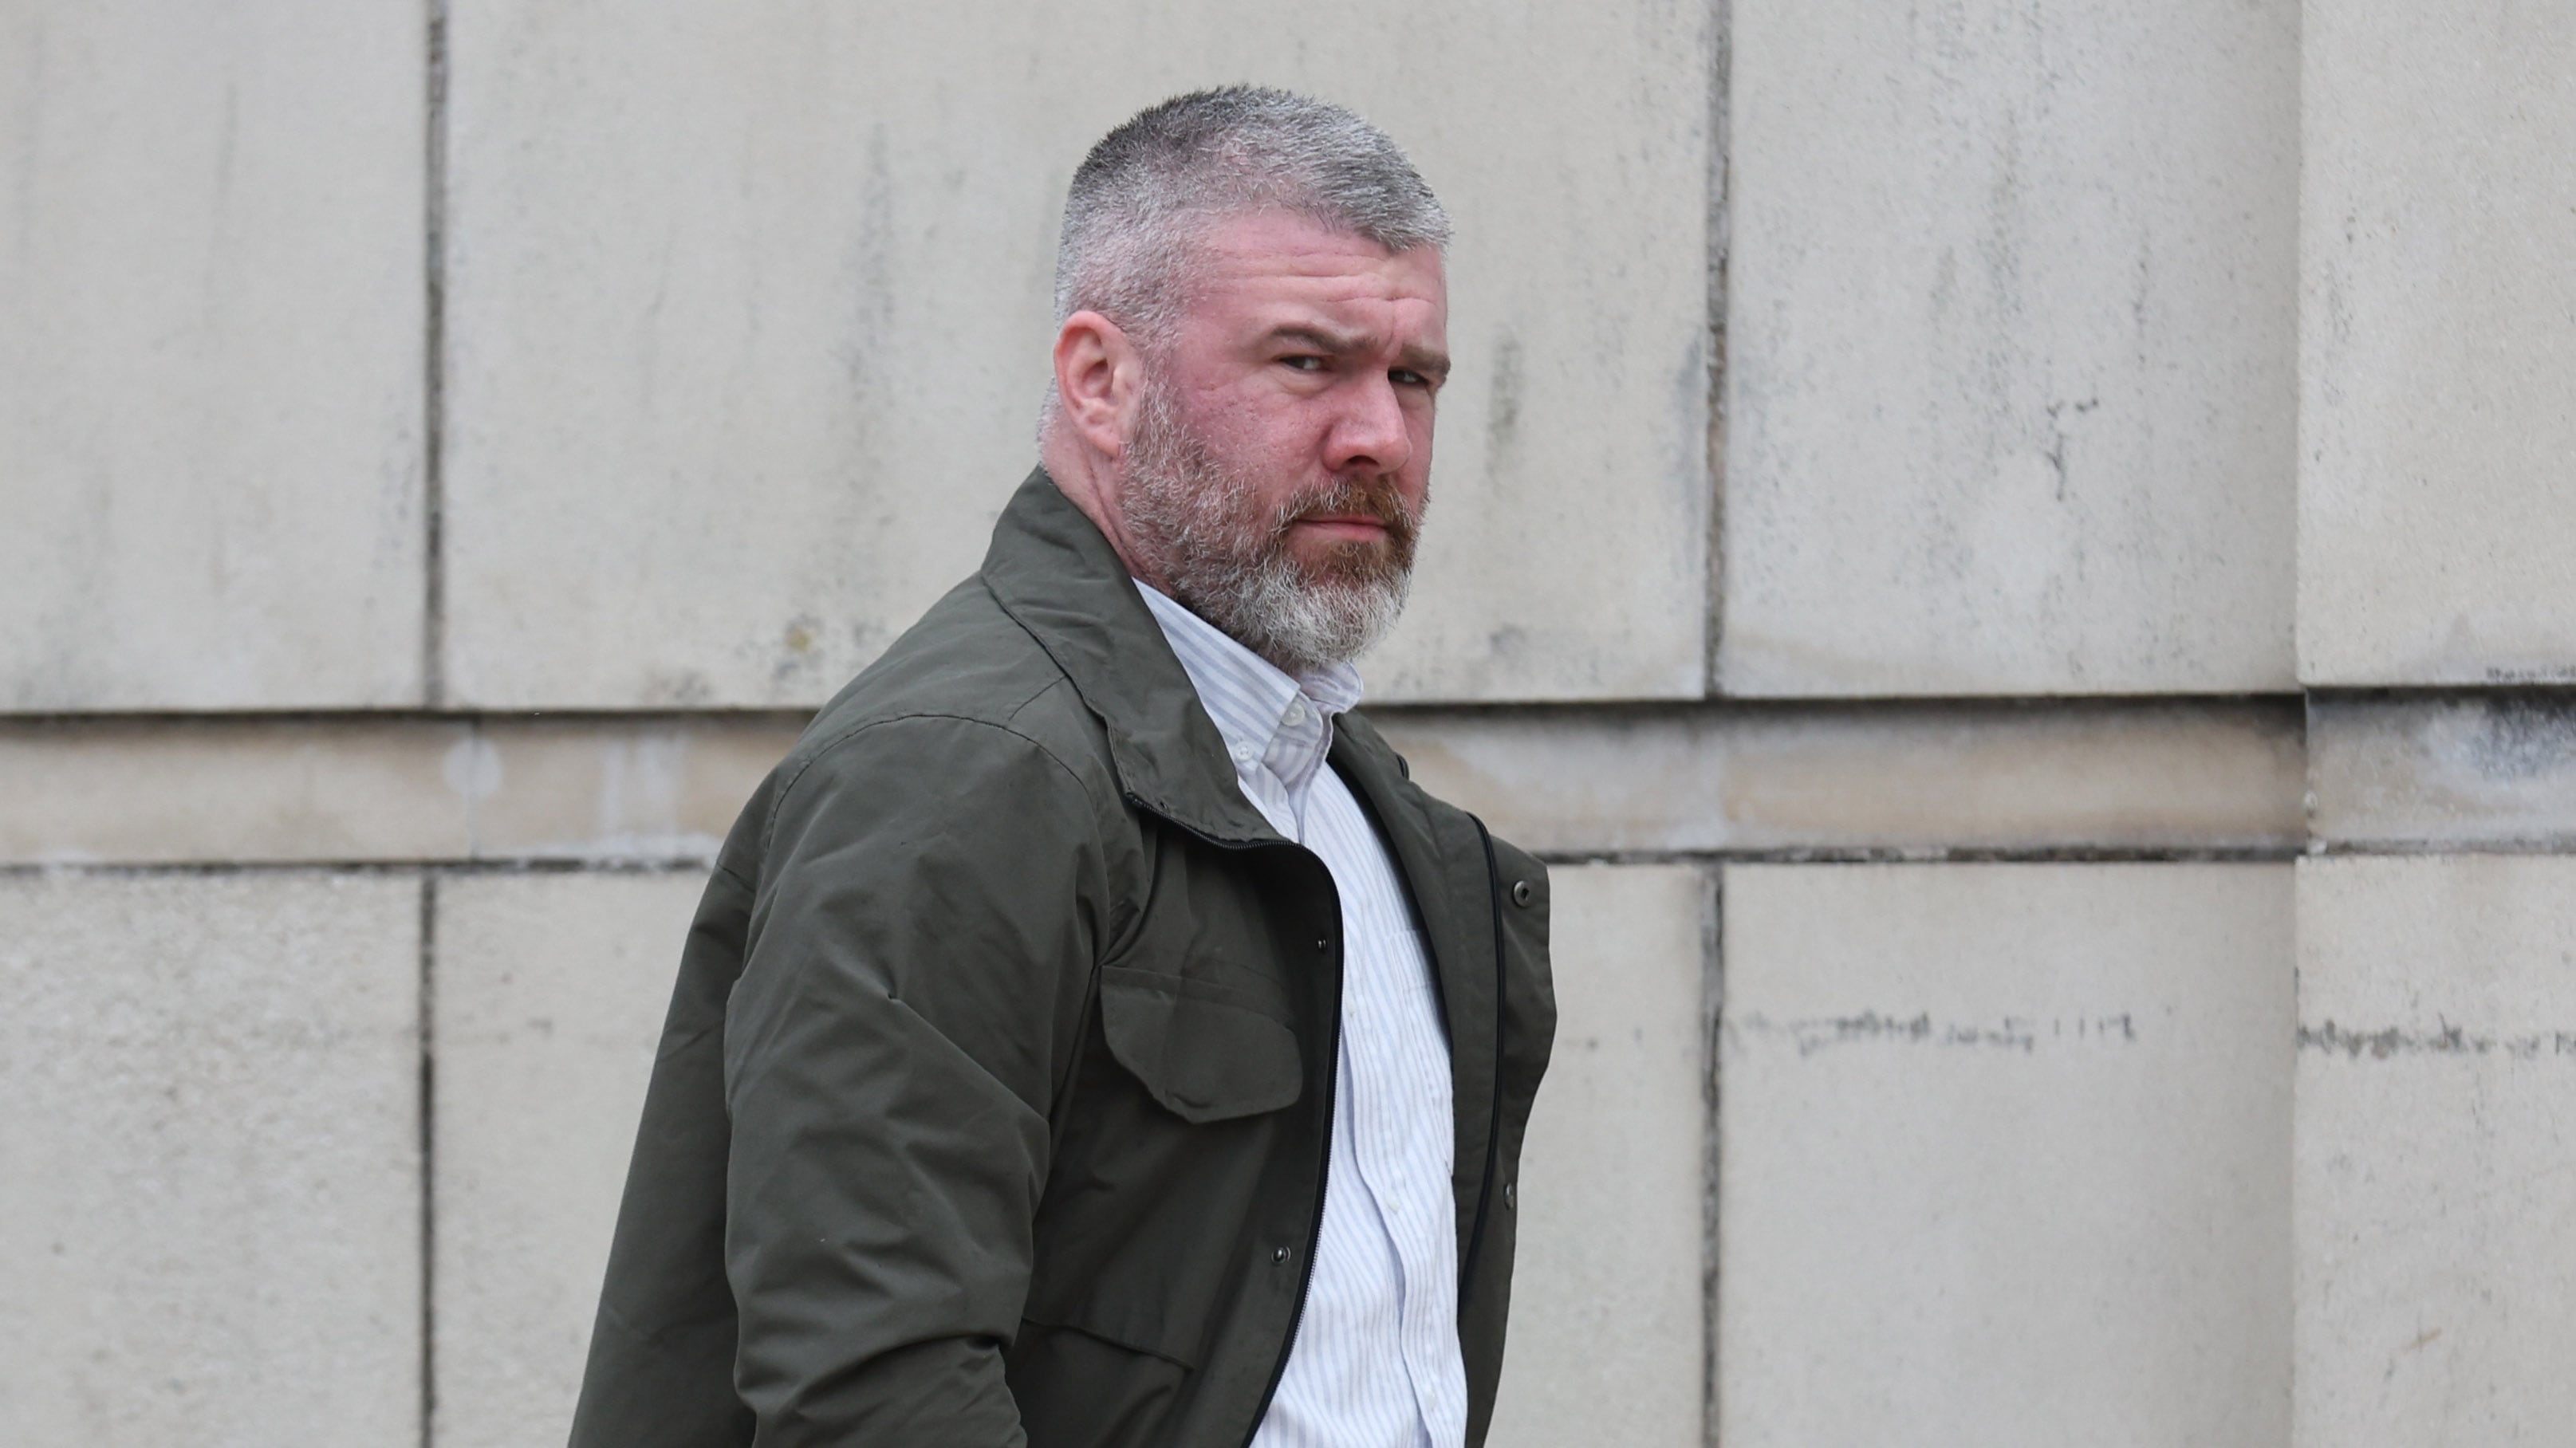 Peter Gearoid Cavanagh who  is on trial for the murder of Lyra McKee.